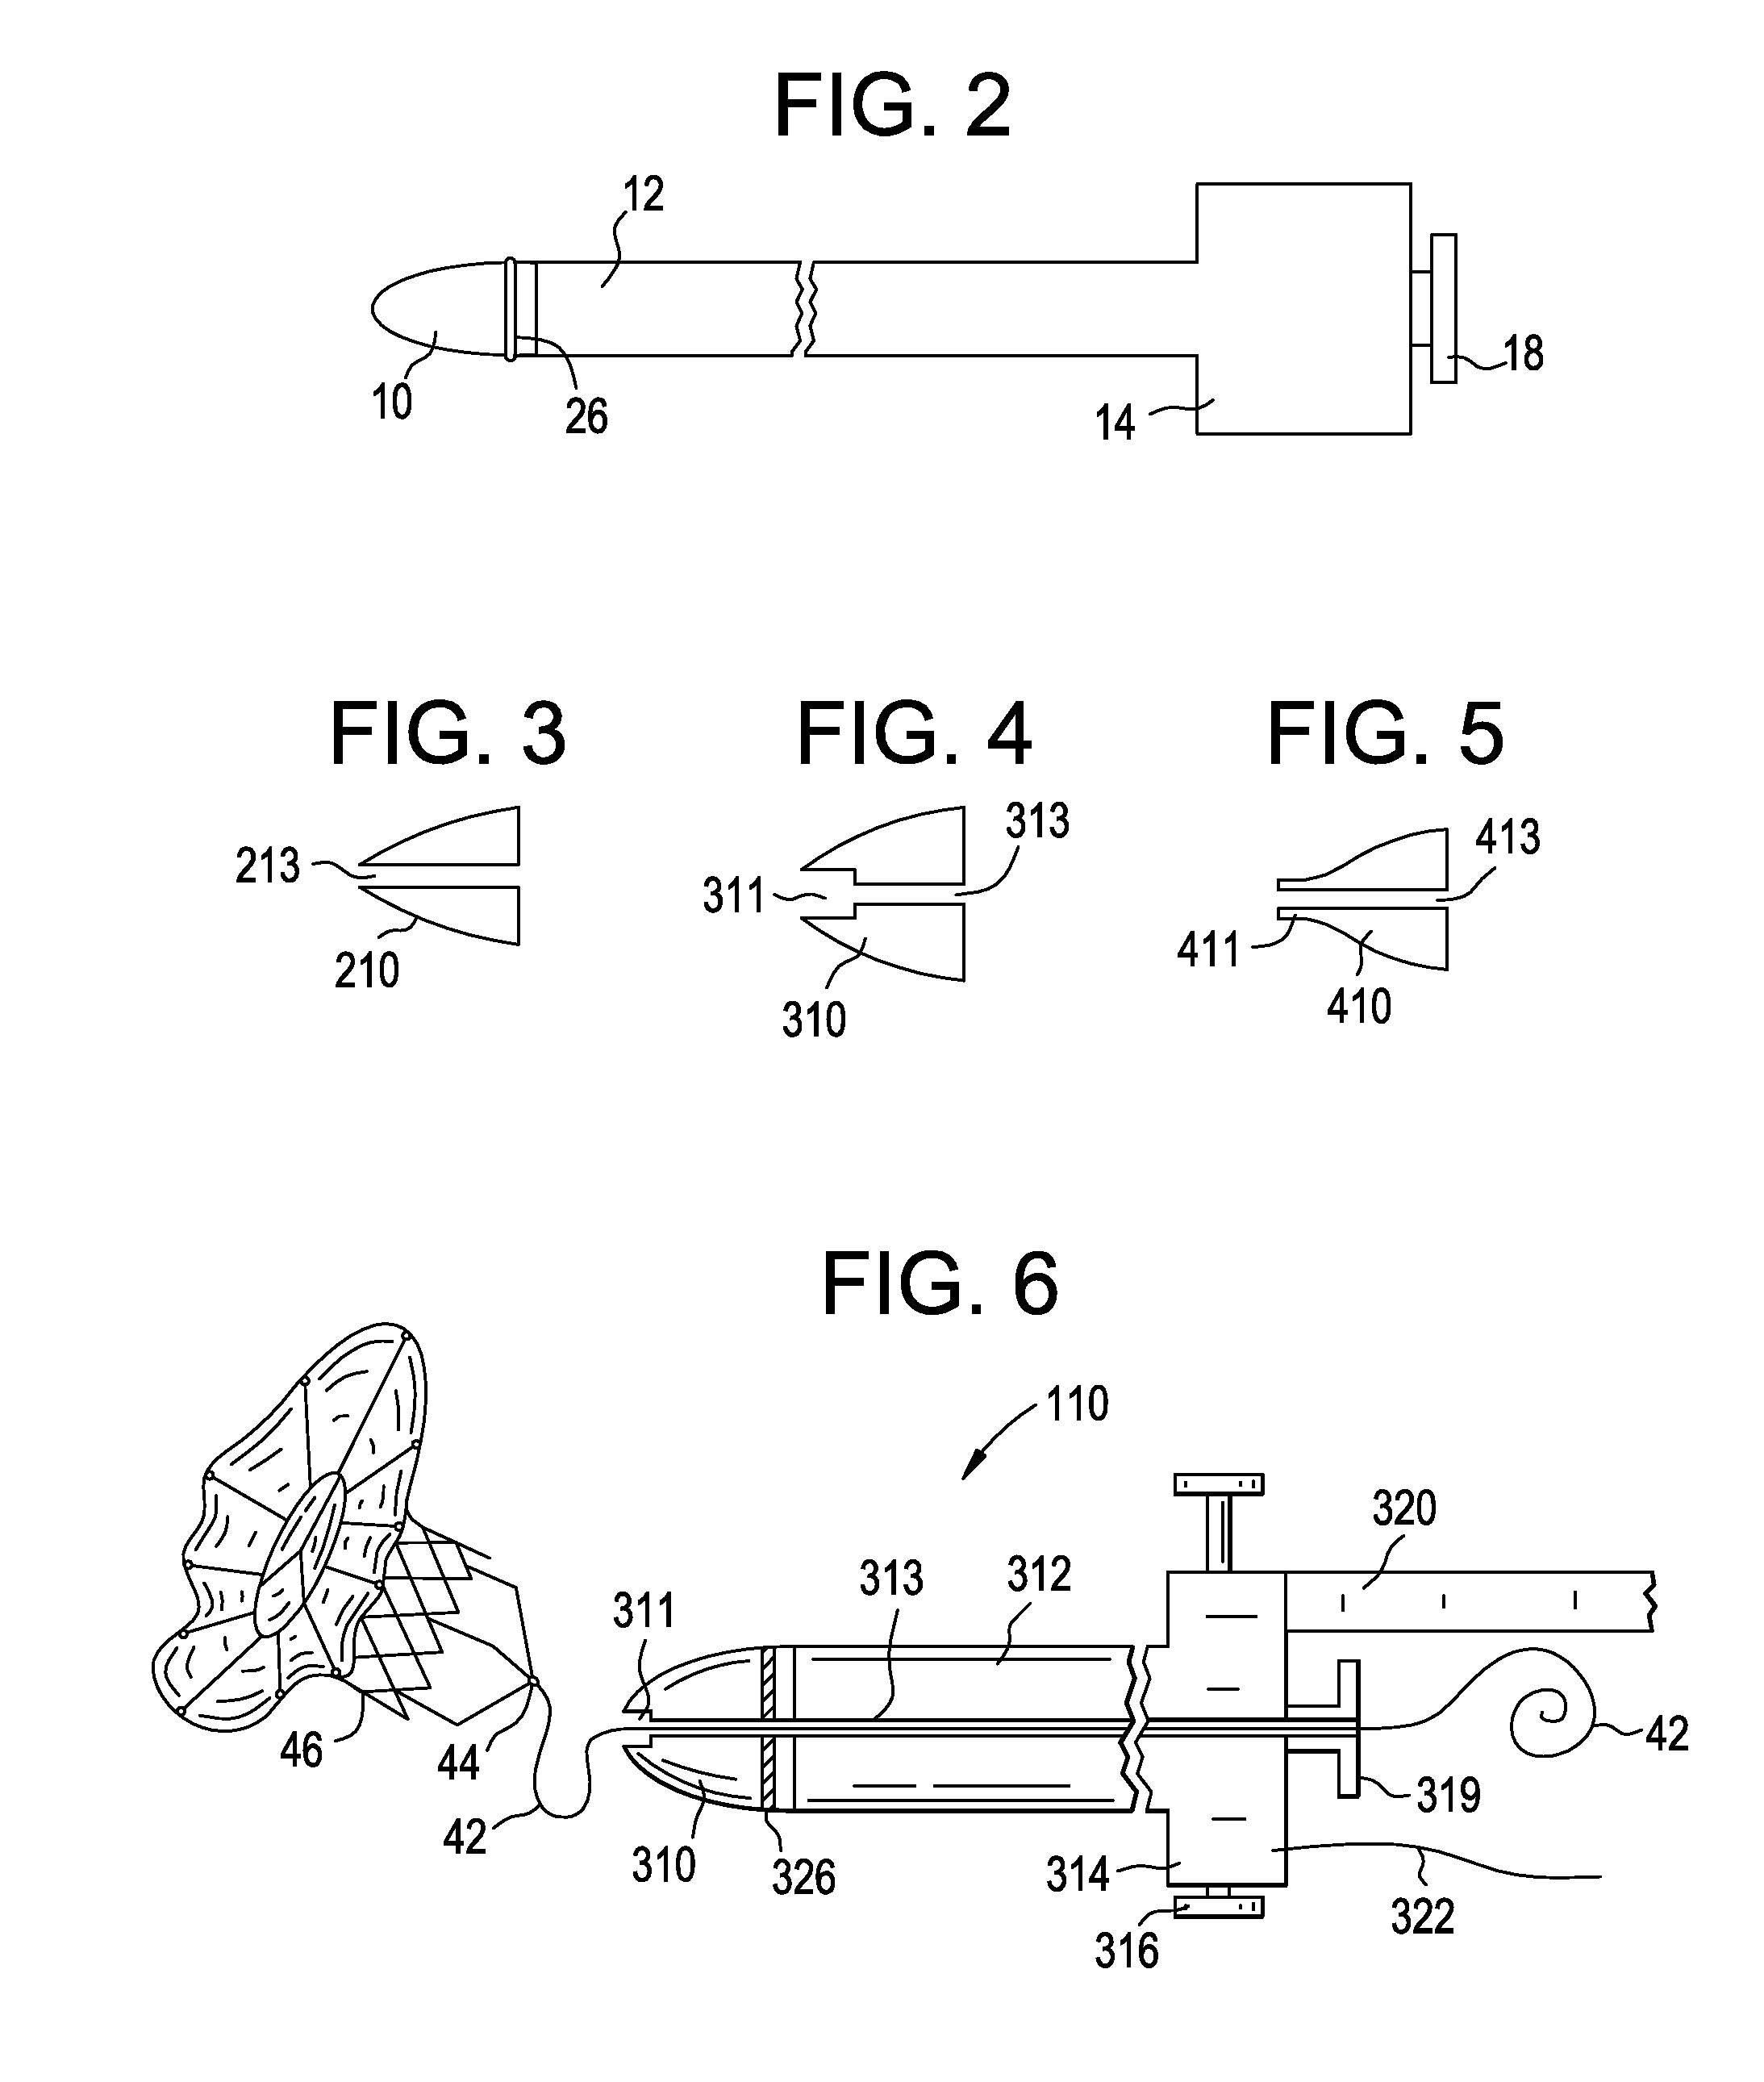 Retrieval and repositioning system for prosthetic heart valve